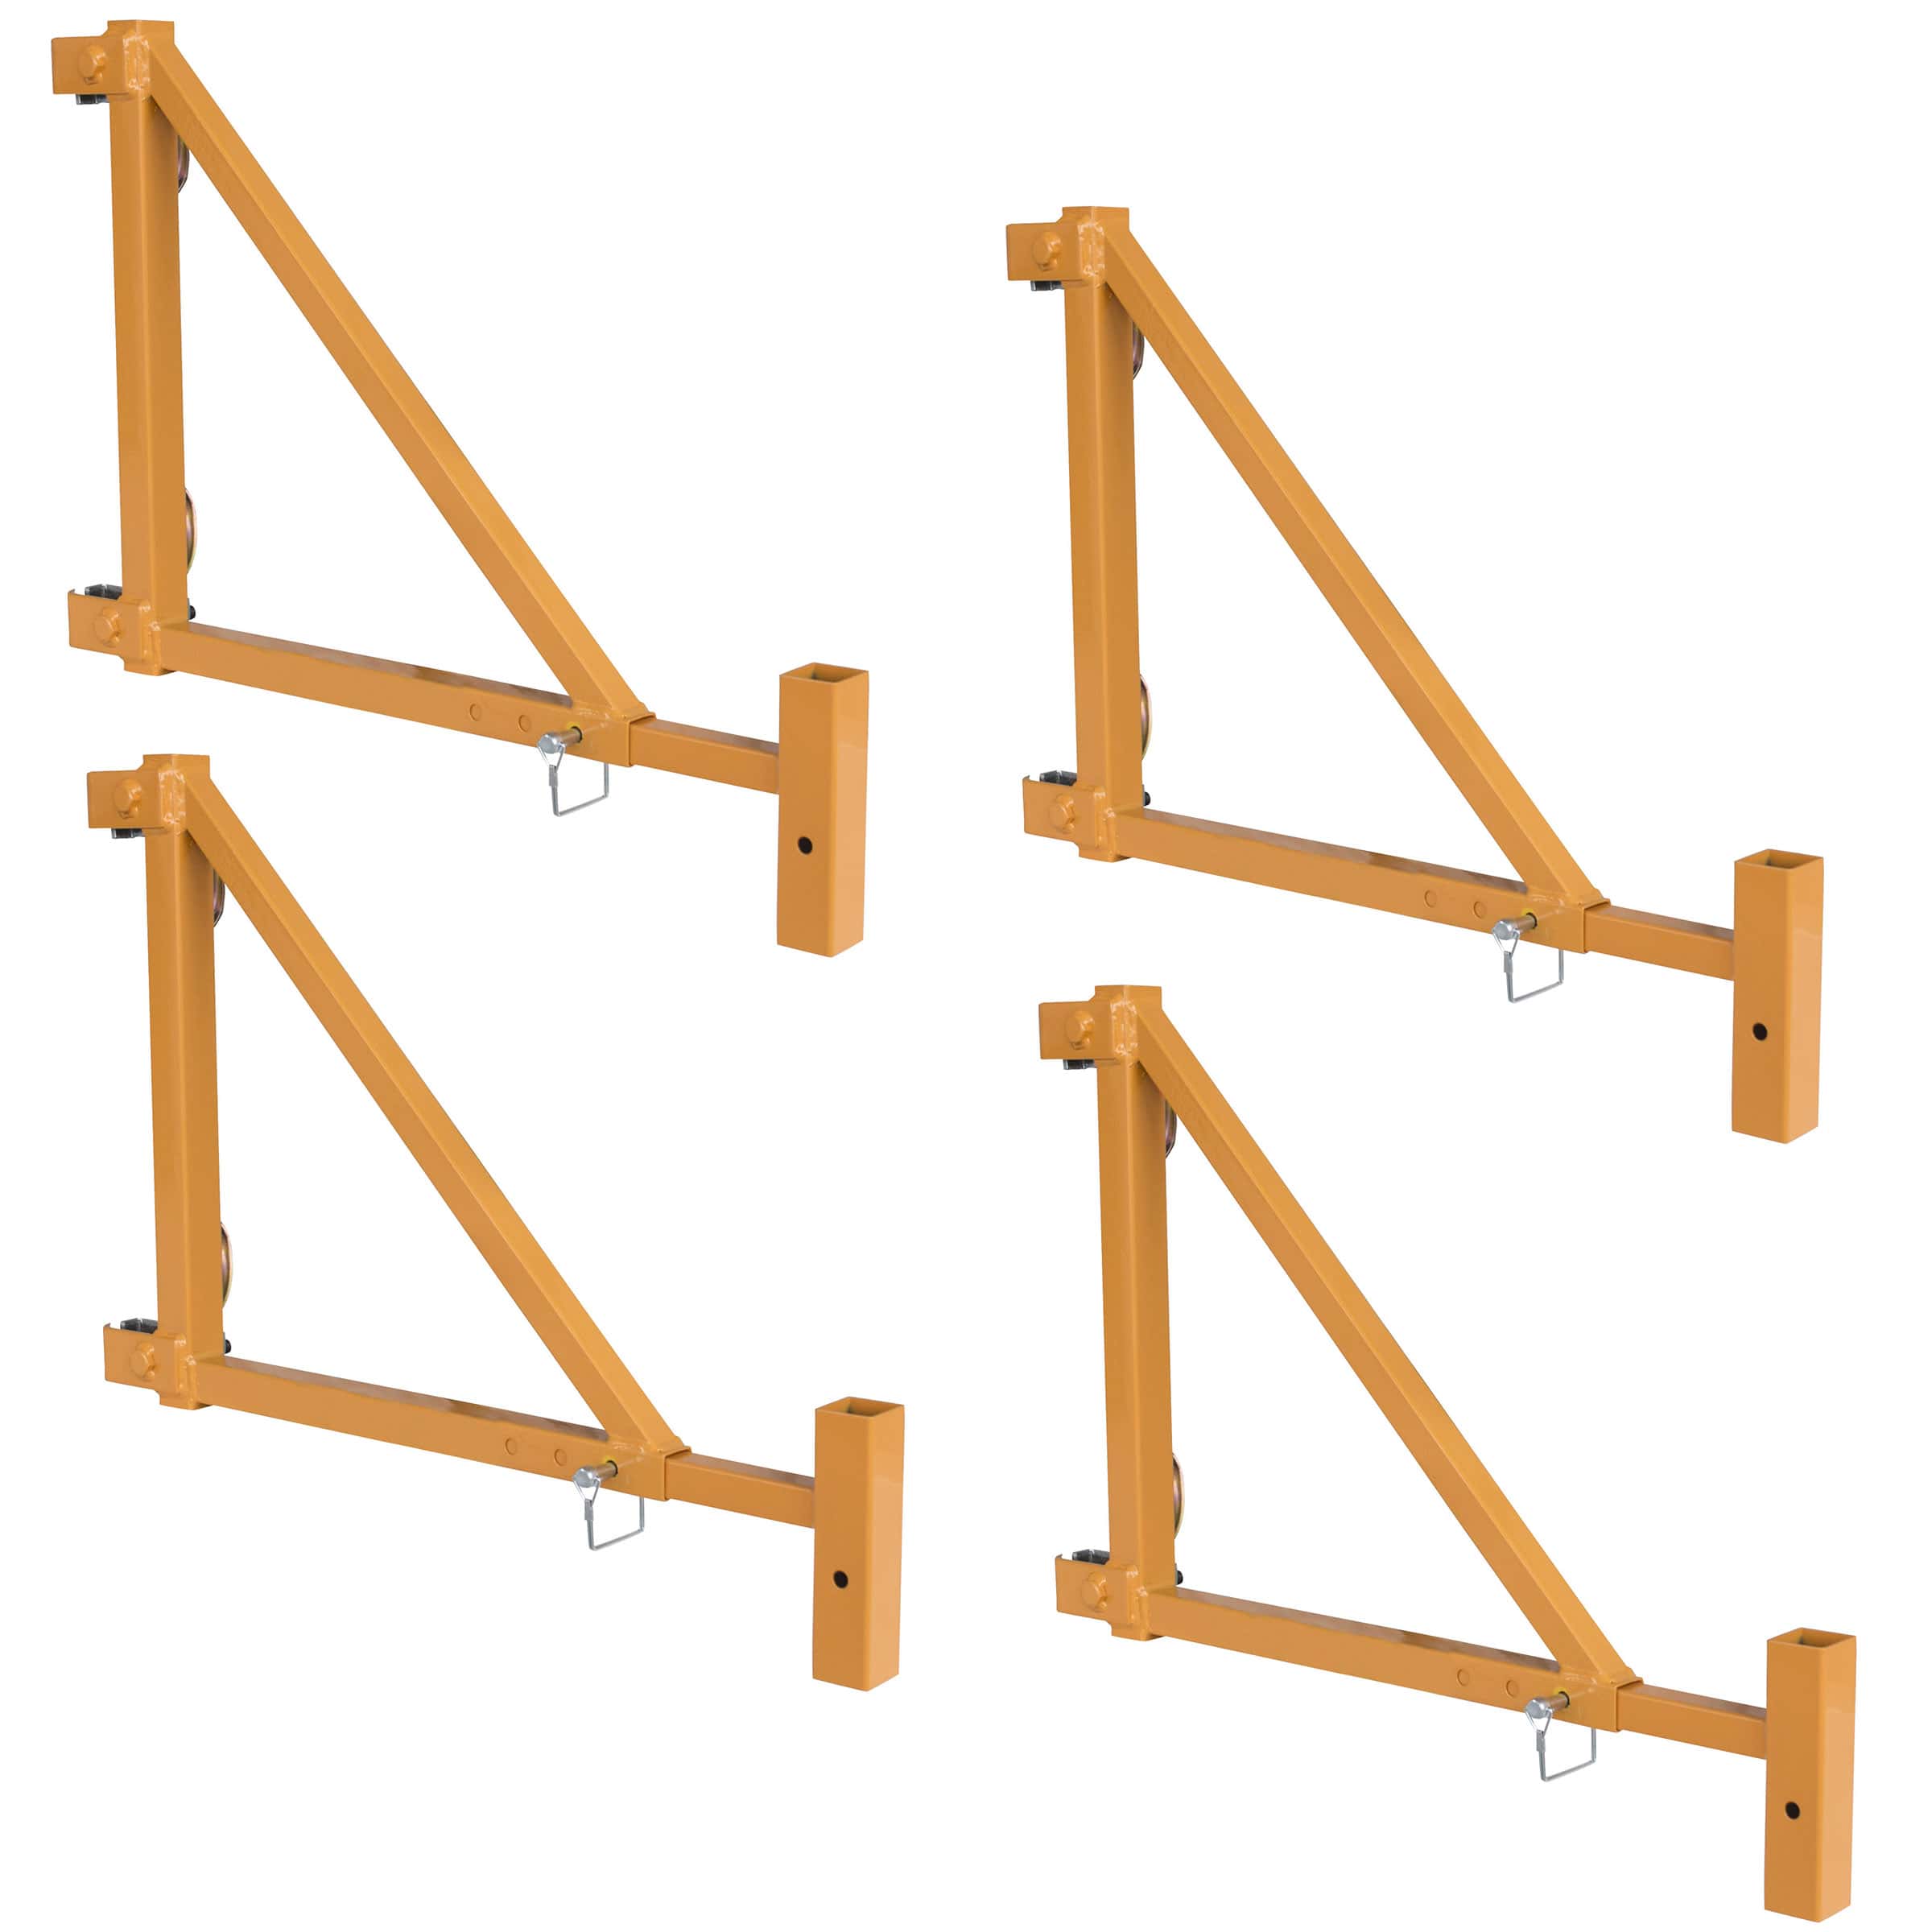 Adjustable Outriggers 4 Piece Set - Pro Series 